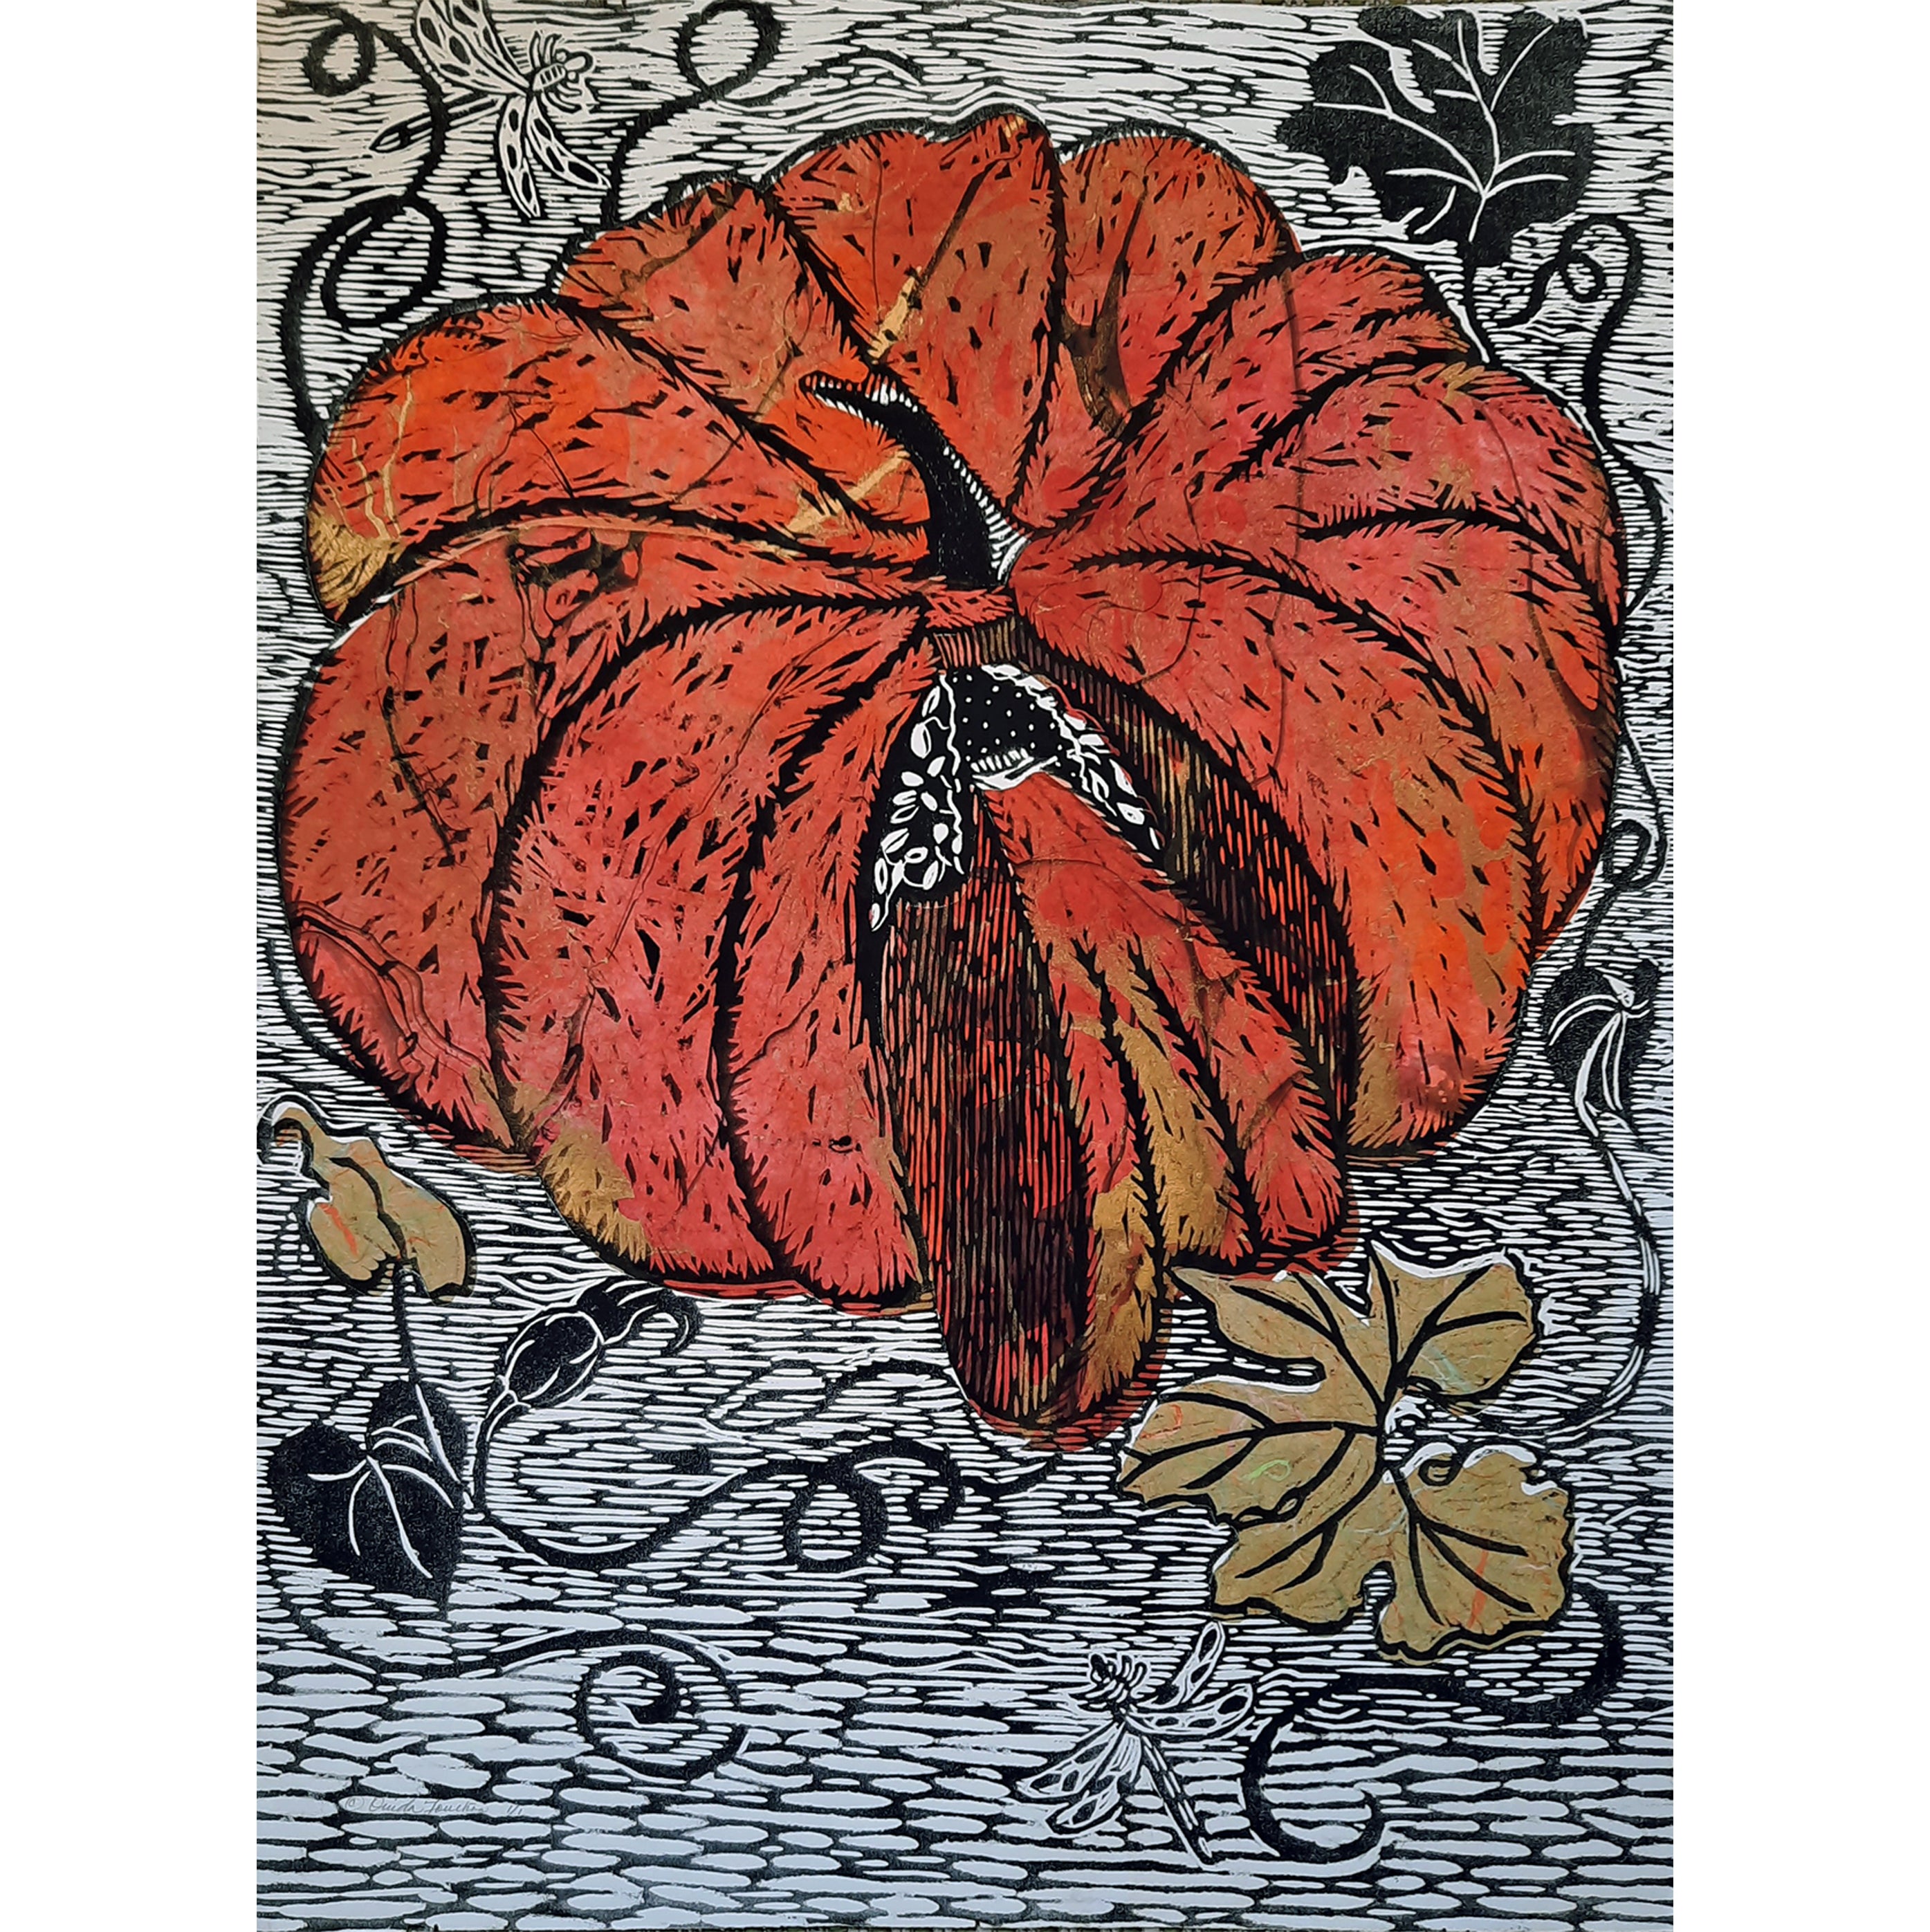 Golden Orange pumpkin with woodcut technique and chine colle collage. One of a kind, size 30hx22w, available for sale unframed by Ouida Touchon